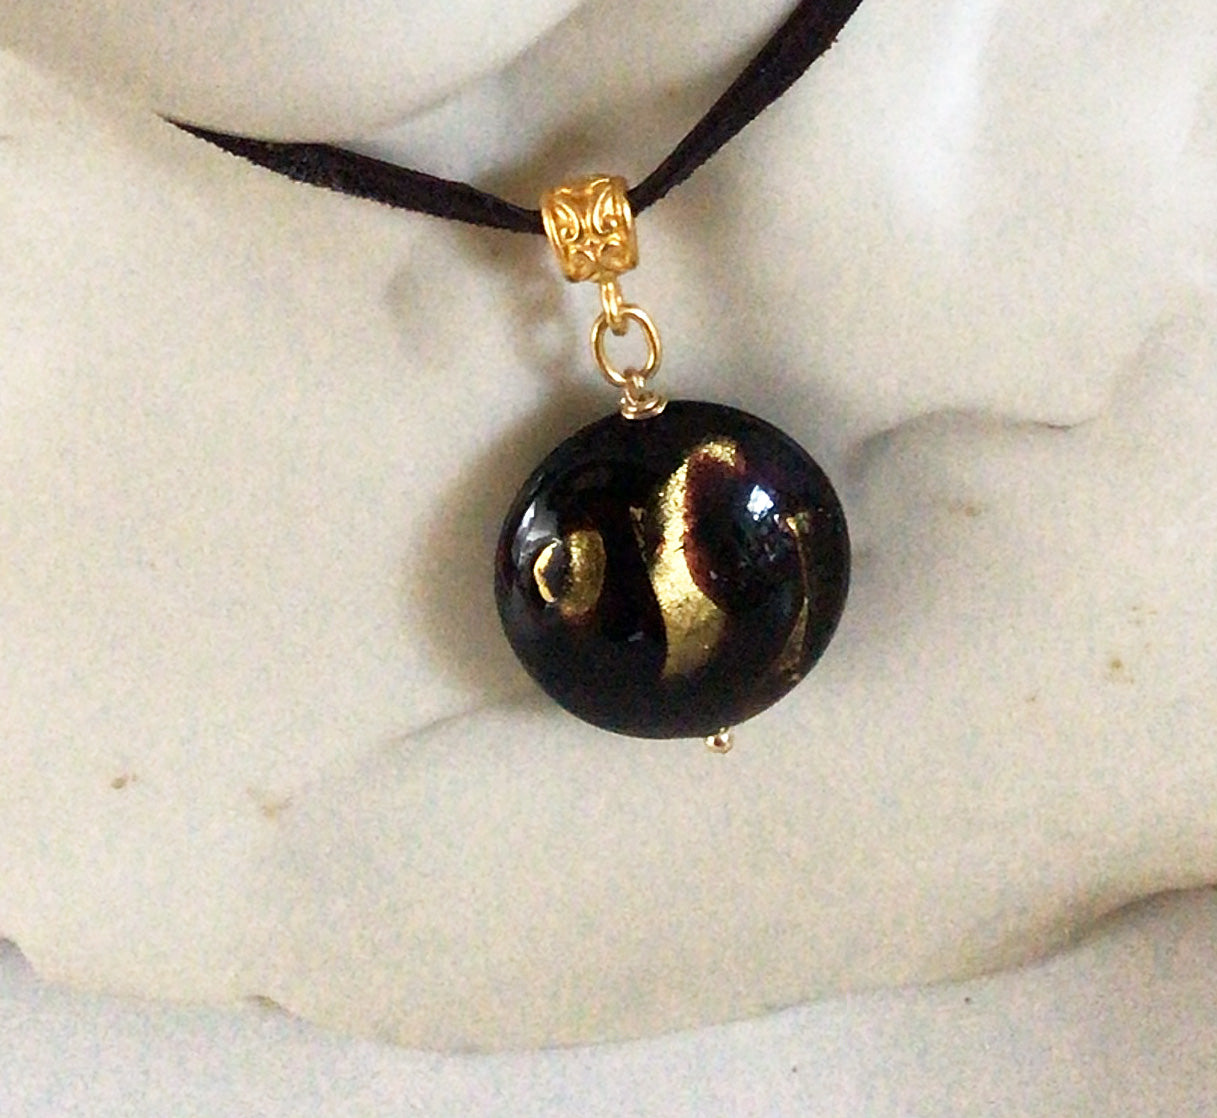 VENETIAN GLASS PENDANT ROUND BROWN W GOLD ON LEATHER